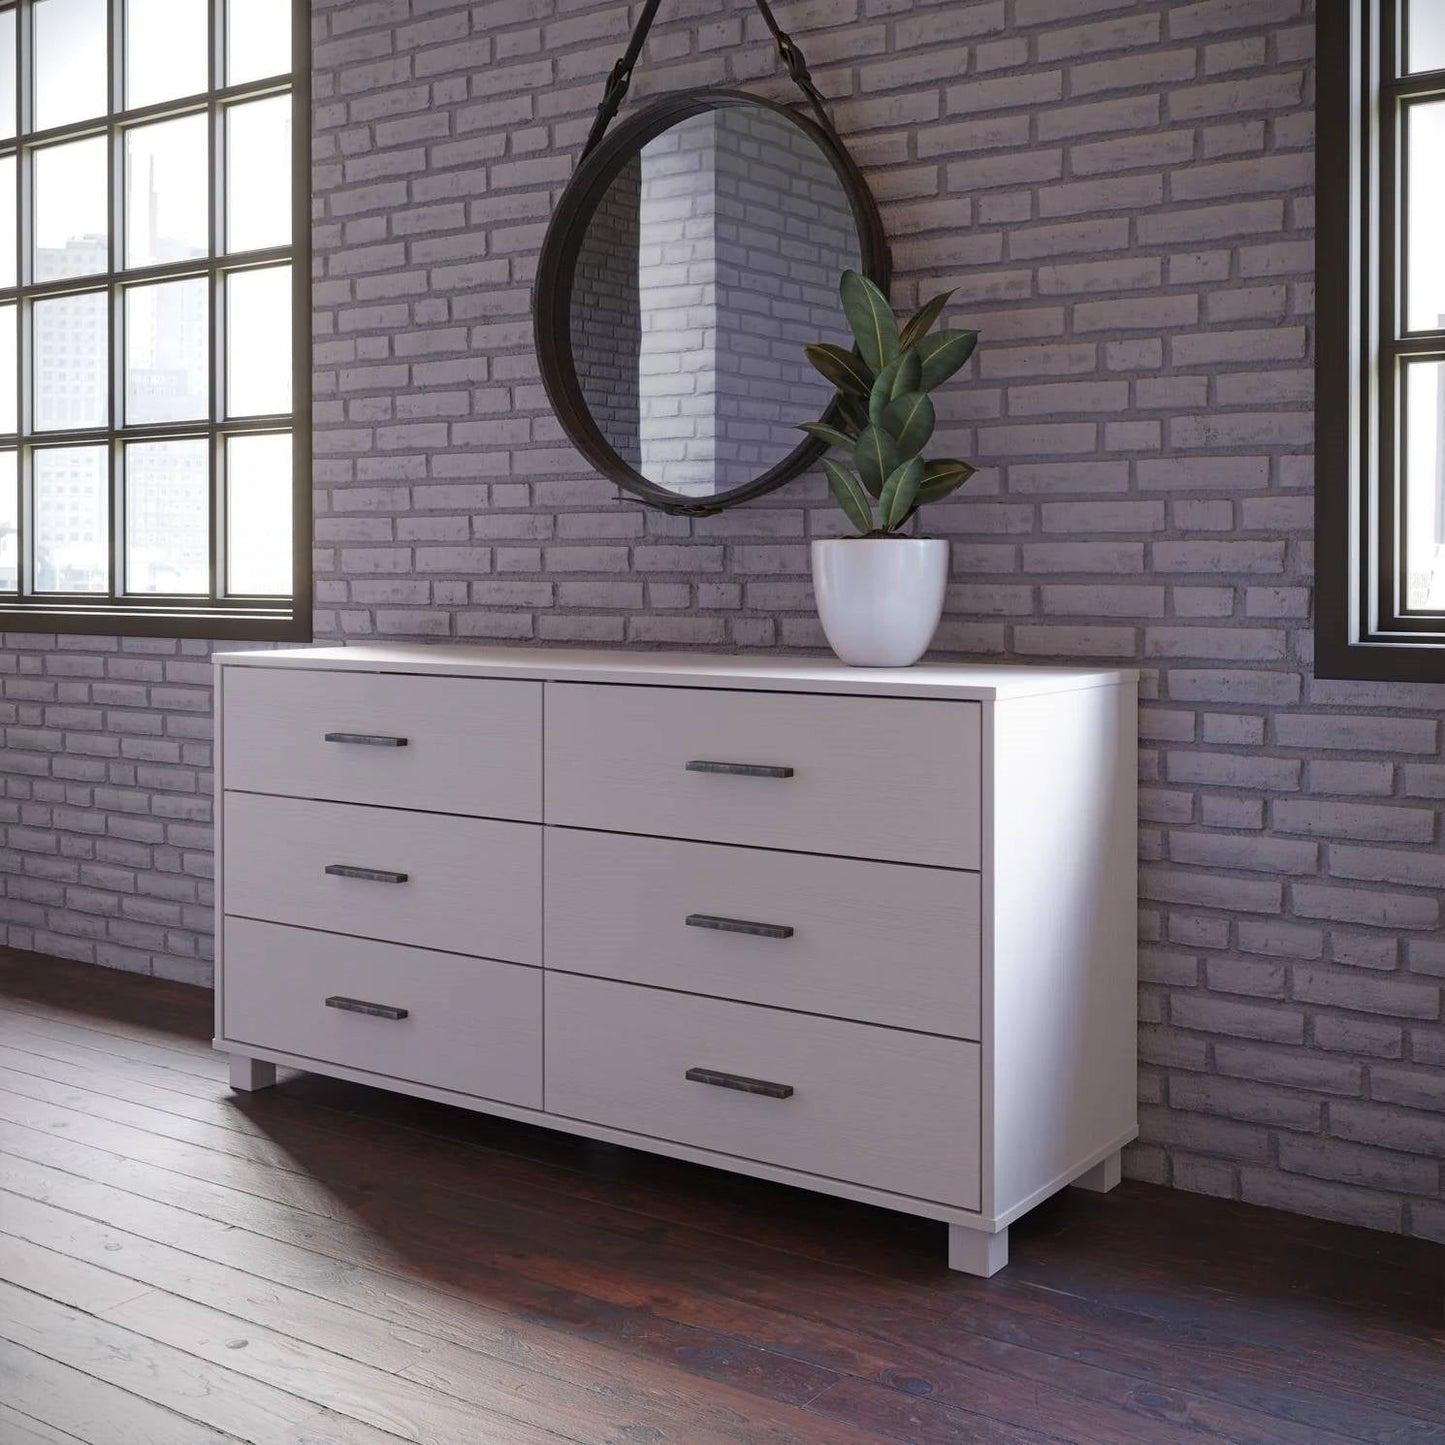 Bedroom > Nightstand And Dressers - Modern Farmhouse Solid Wood 6 Drawer Double Dresser In White Finish